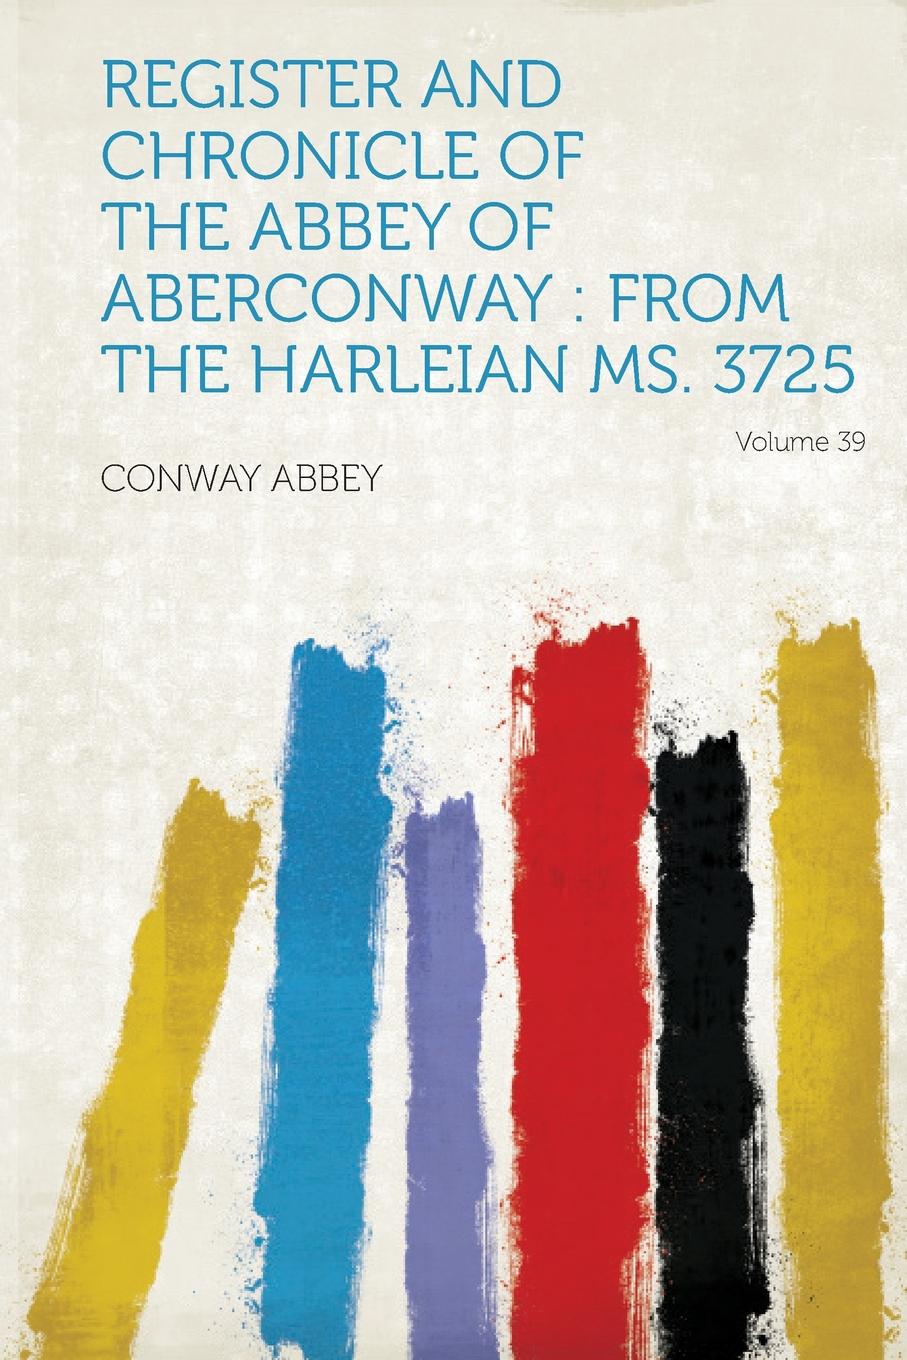 Register and Chronicle of the Abbey of Aberconway. from the Harleian Ms. 3725 Volume 39